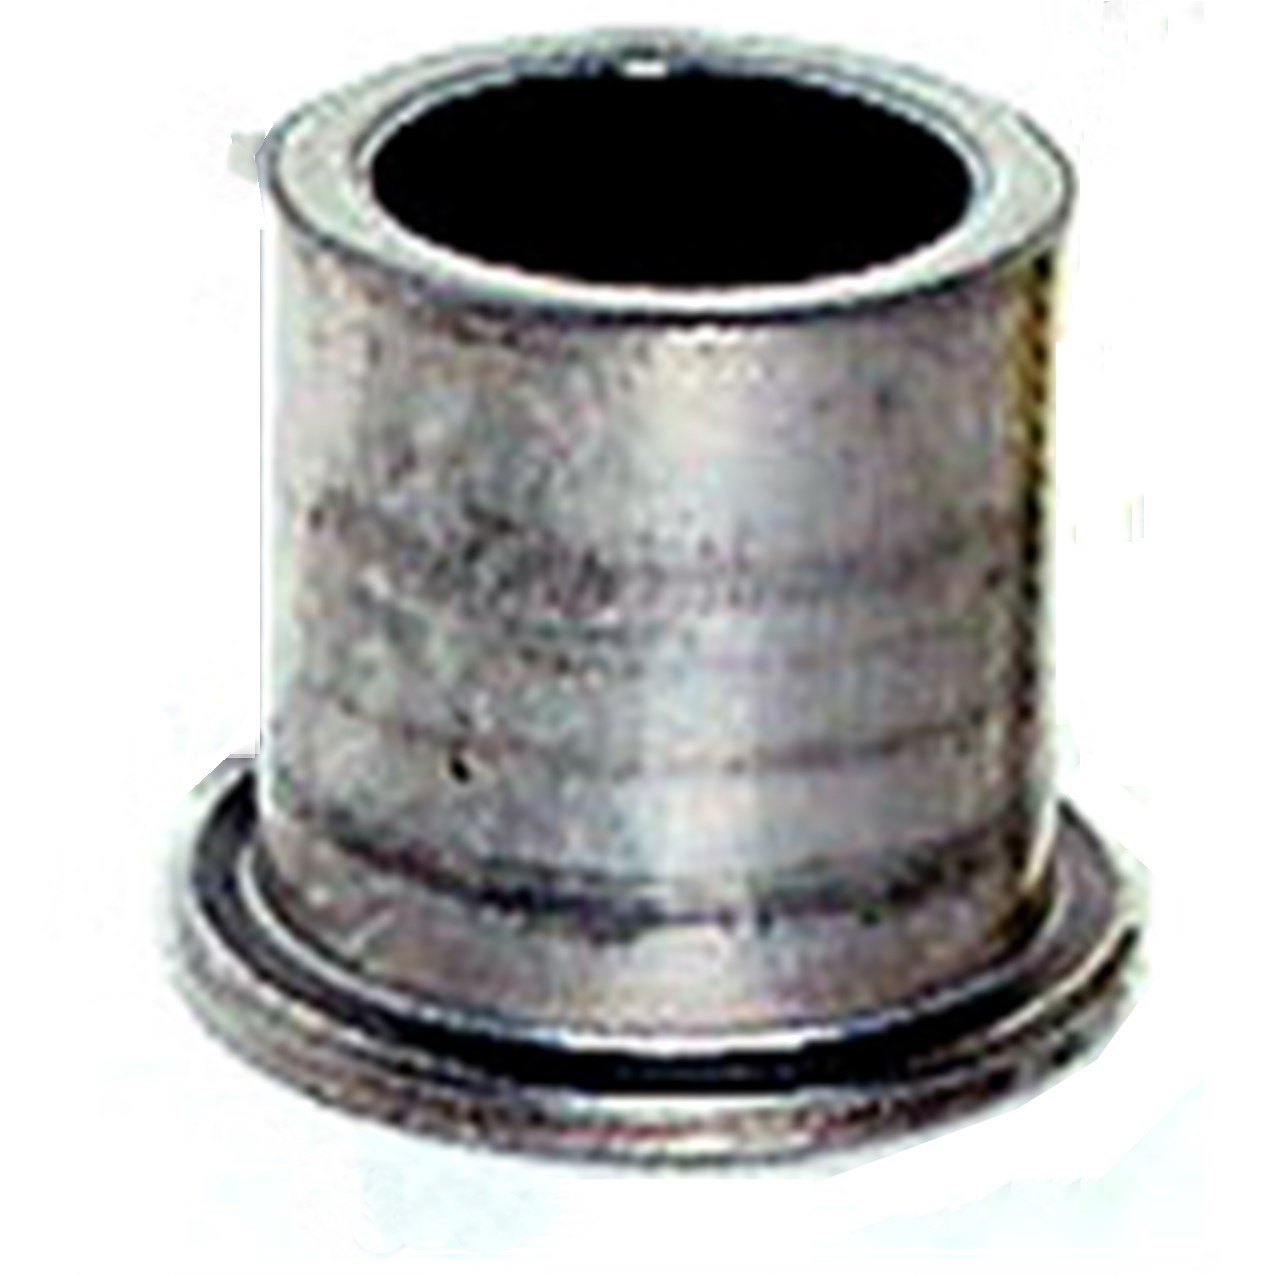 A-Arm Bushing Fits Most E-Ton 50,70,90cc ATVs (Oil Containing Bushing) ID=15.5 OD1=21 OD2=26 H=20 - Click Image to Close